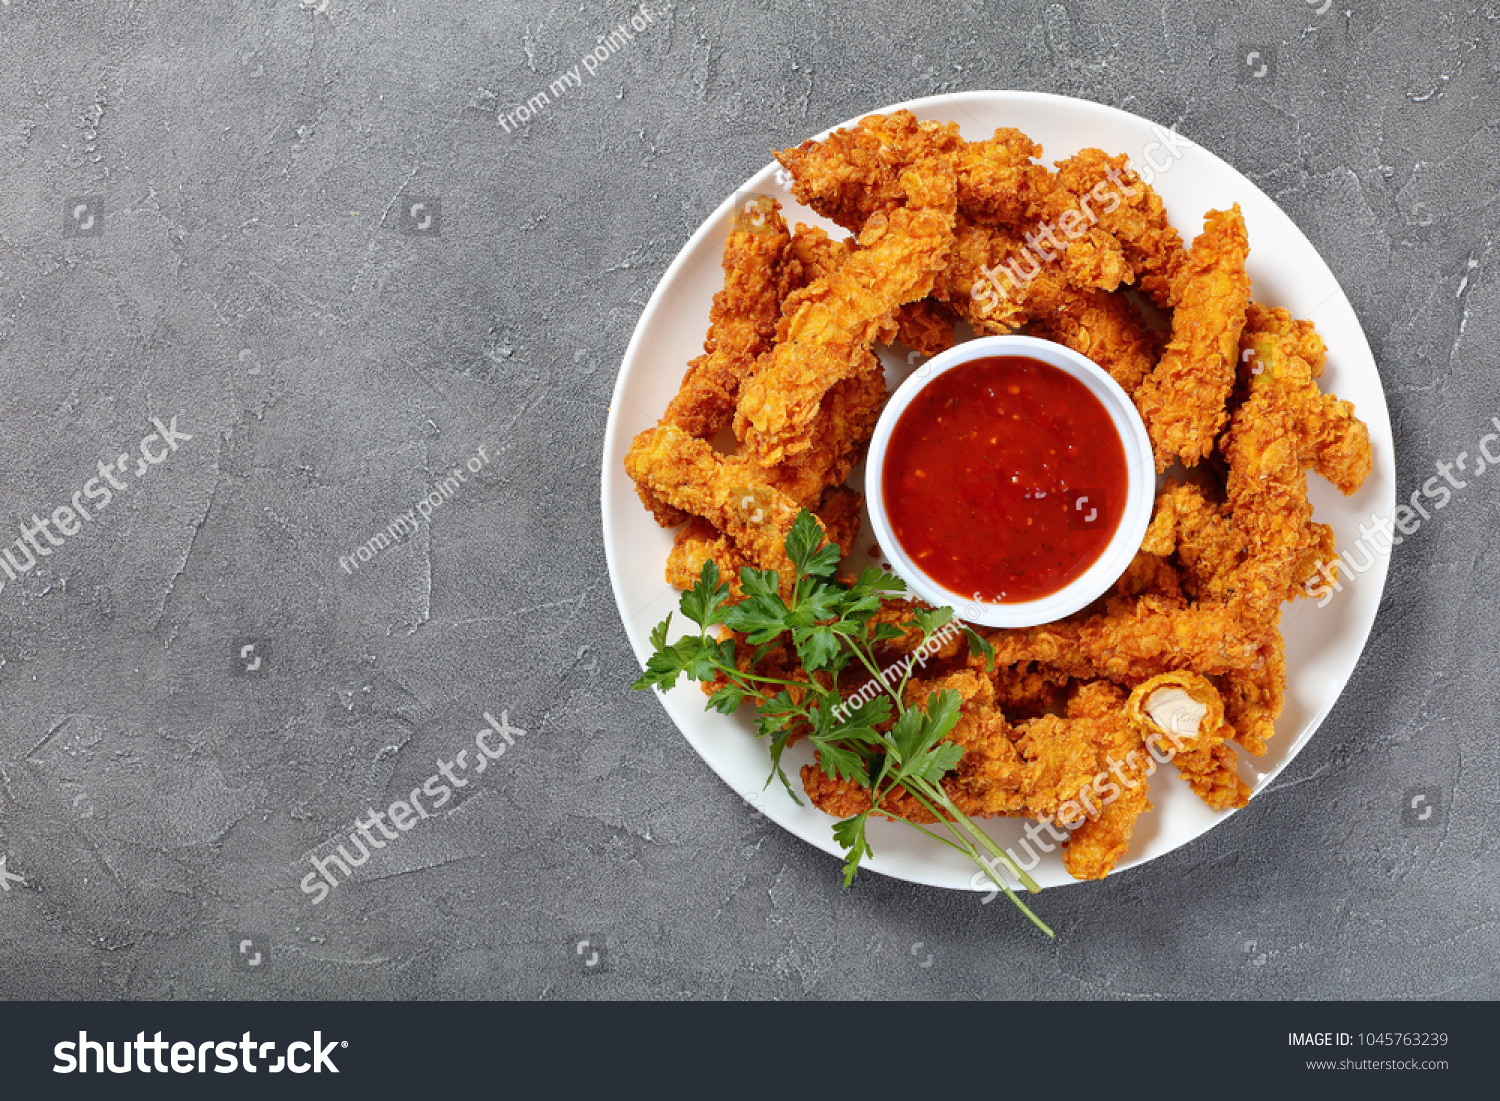 delicious crispy fried chicken breast strips  with tomato sauce on white plate, on concrete table, view from above #1045763239